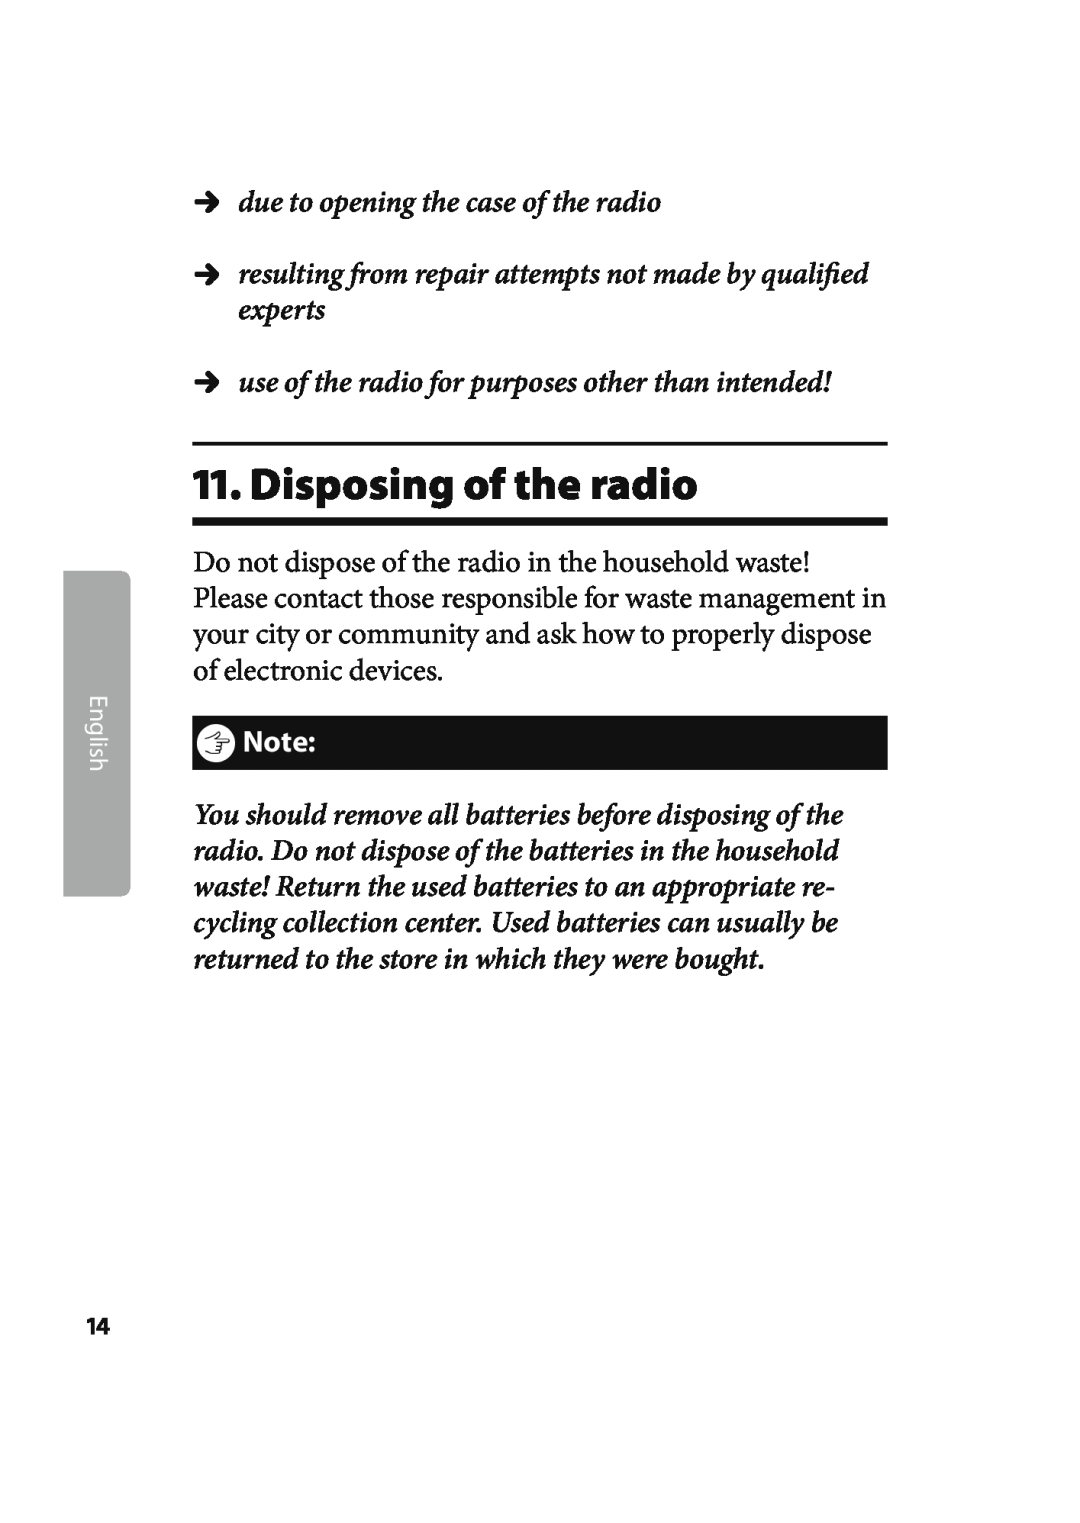 Kompernass KH 2244 manual Disposing of the radio, Údue to opening the case of the radio, ôNote, English 